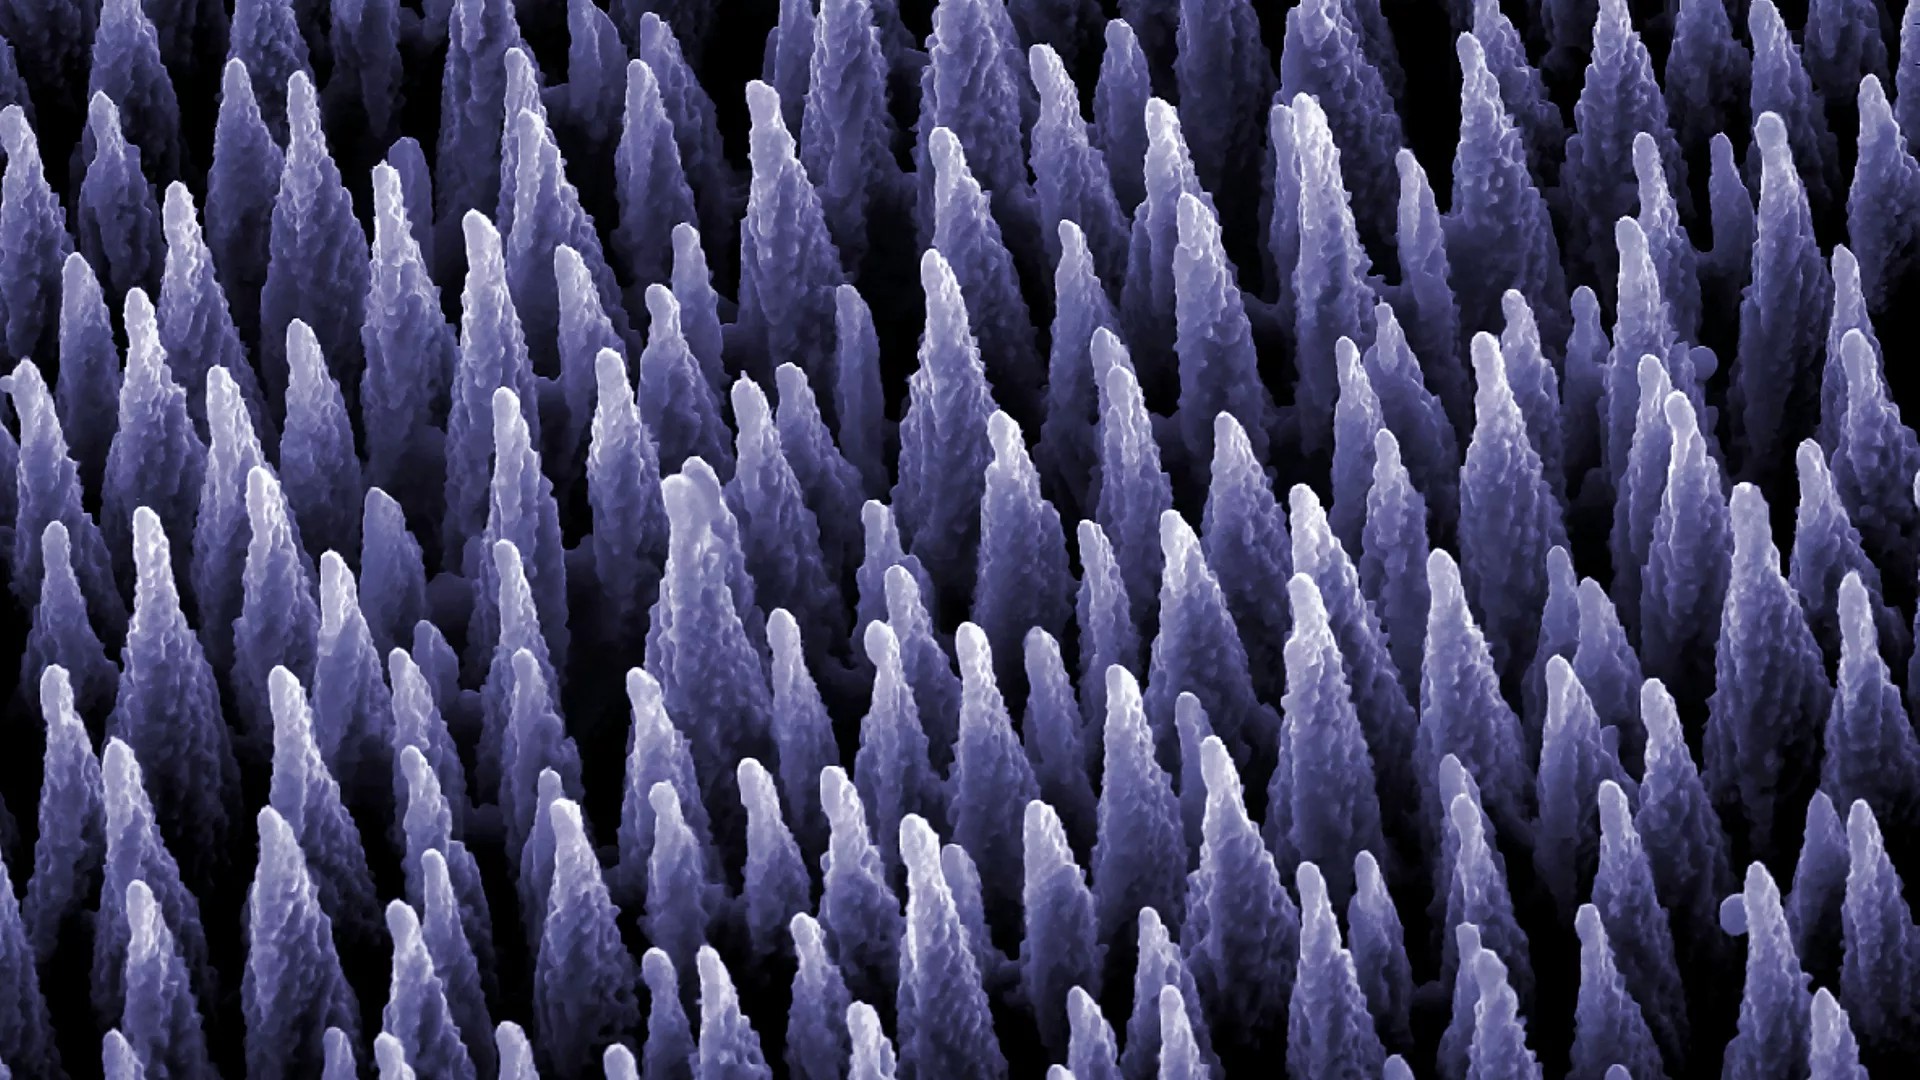 Cover image for "2022 Retrospective: Carbon-Based Materials"